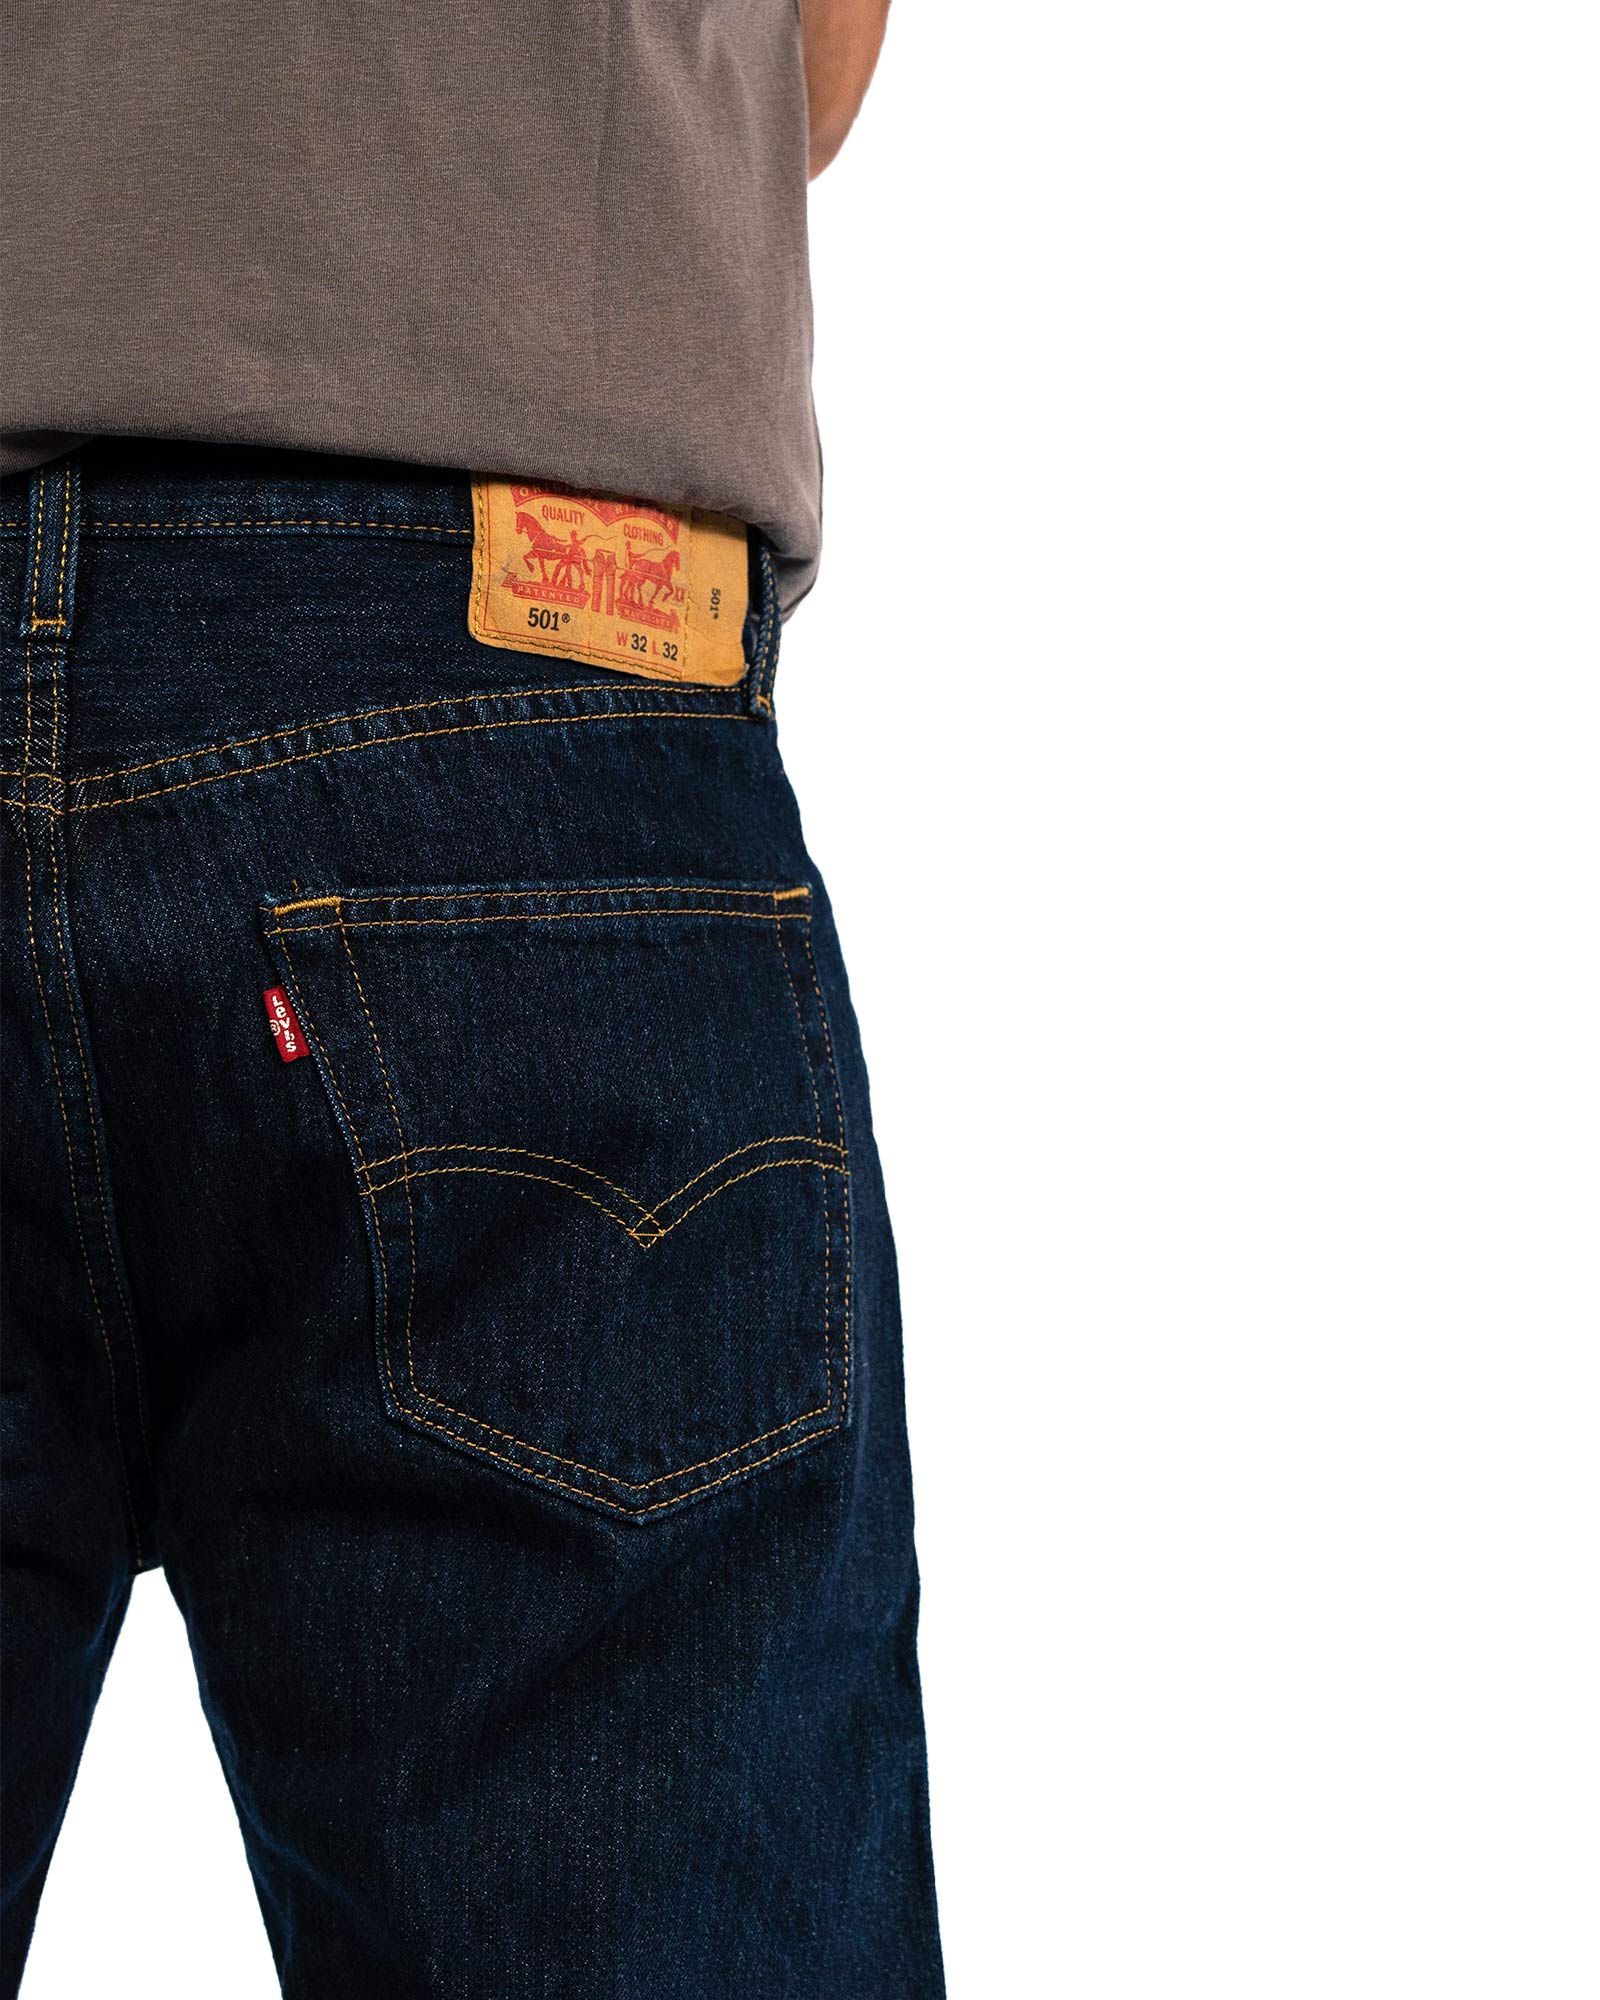 A view of back pocket on the Levi's 501 jeans